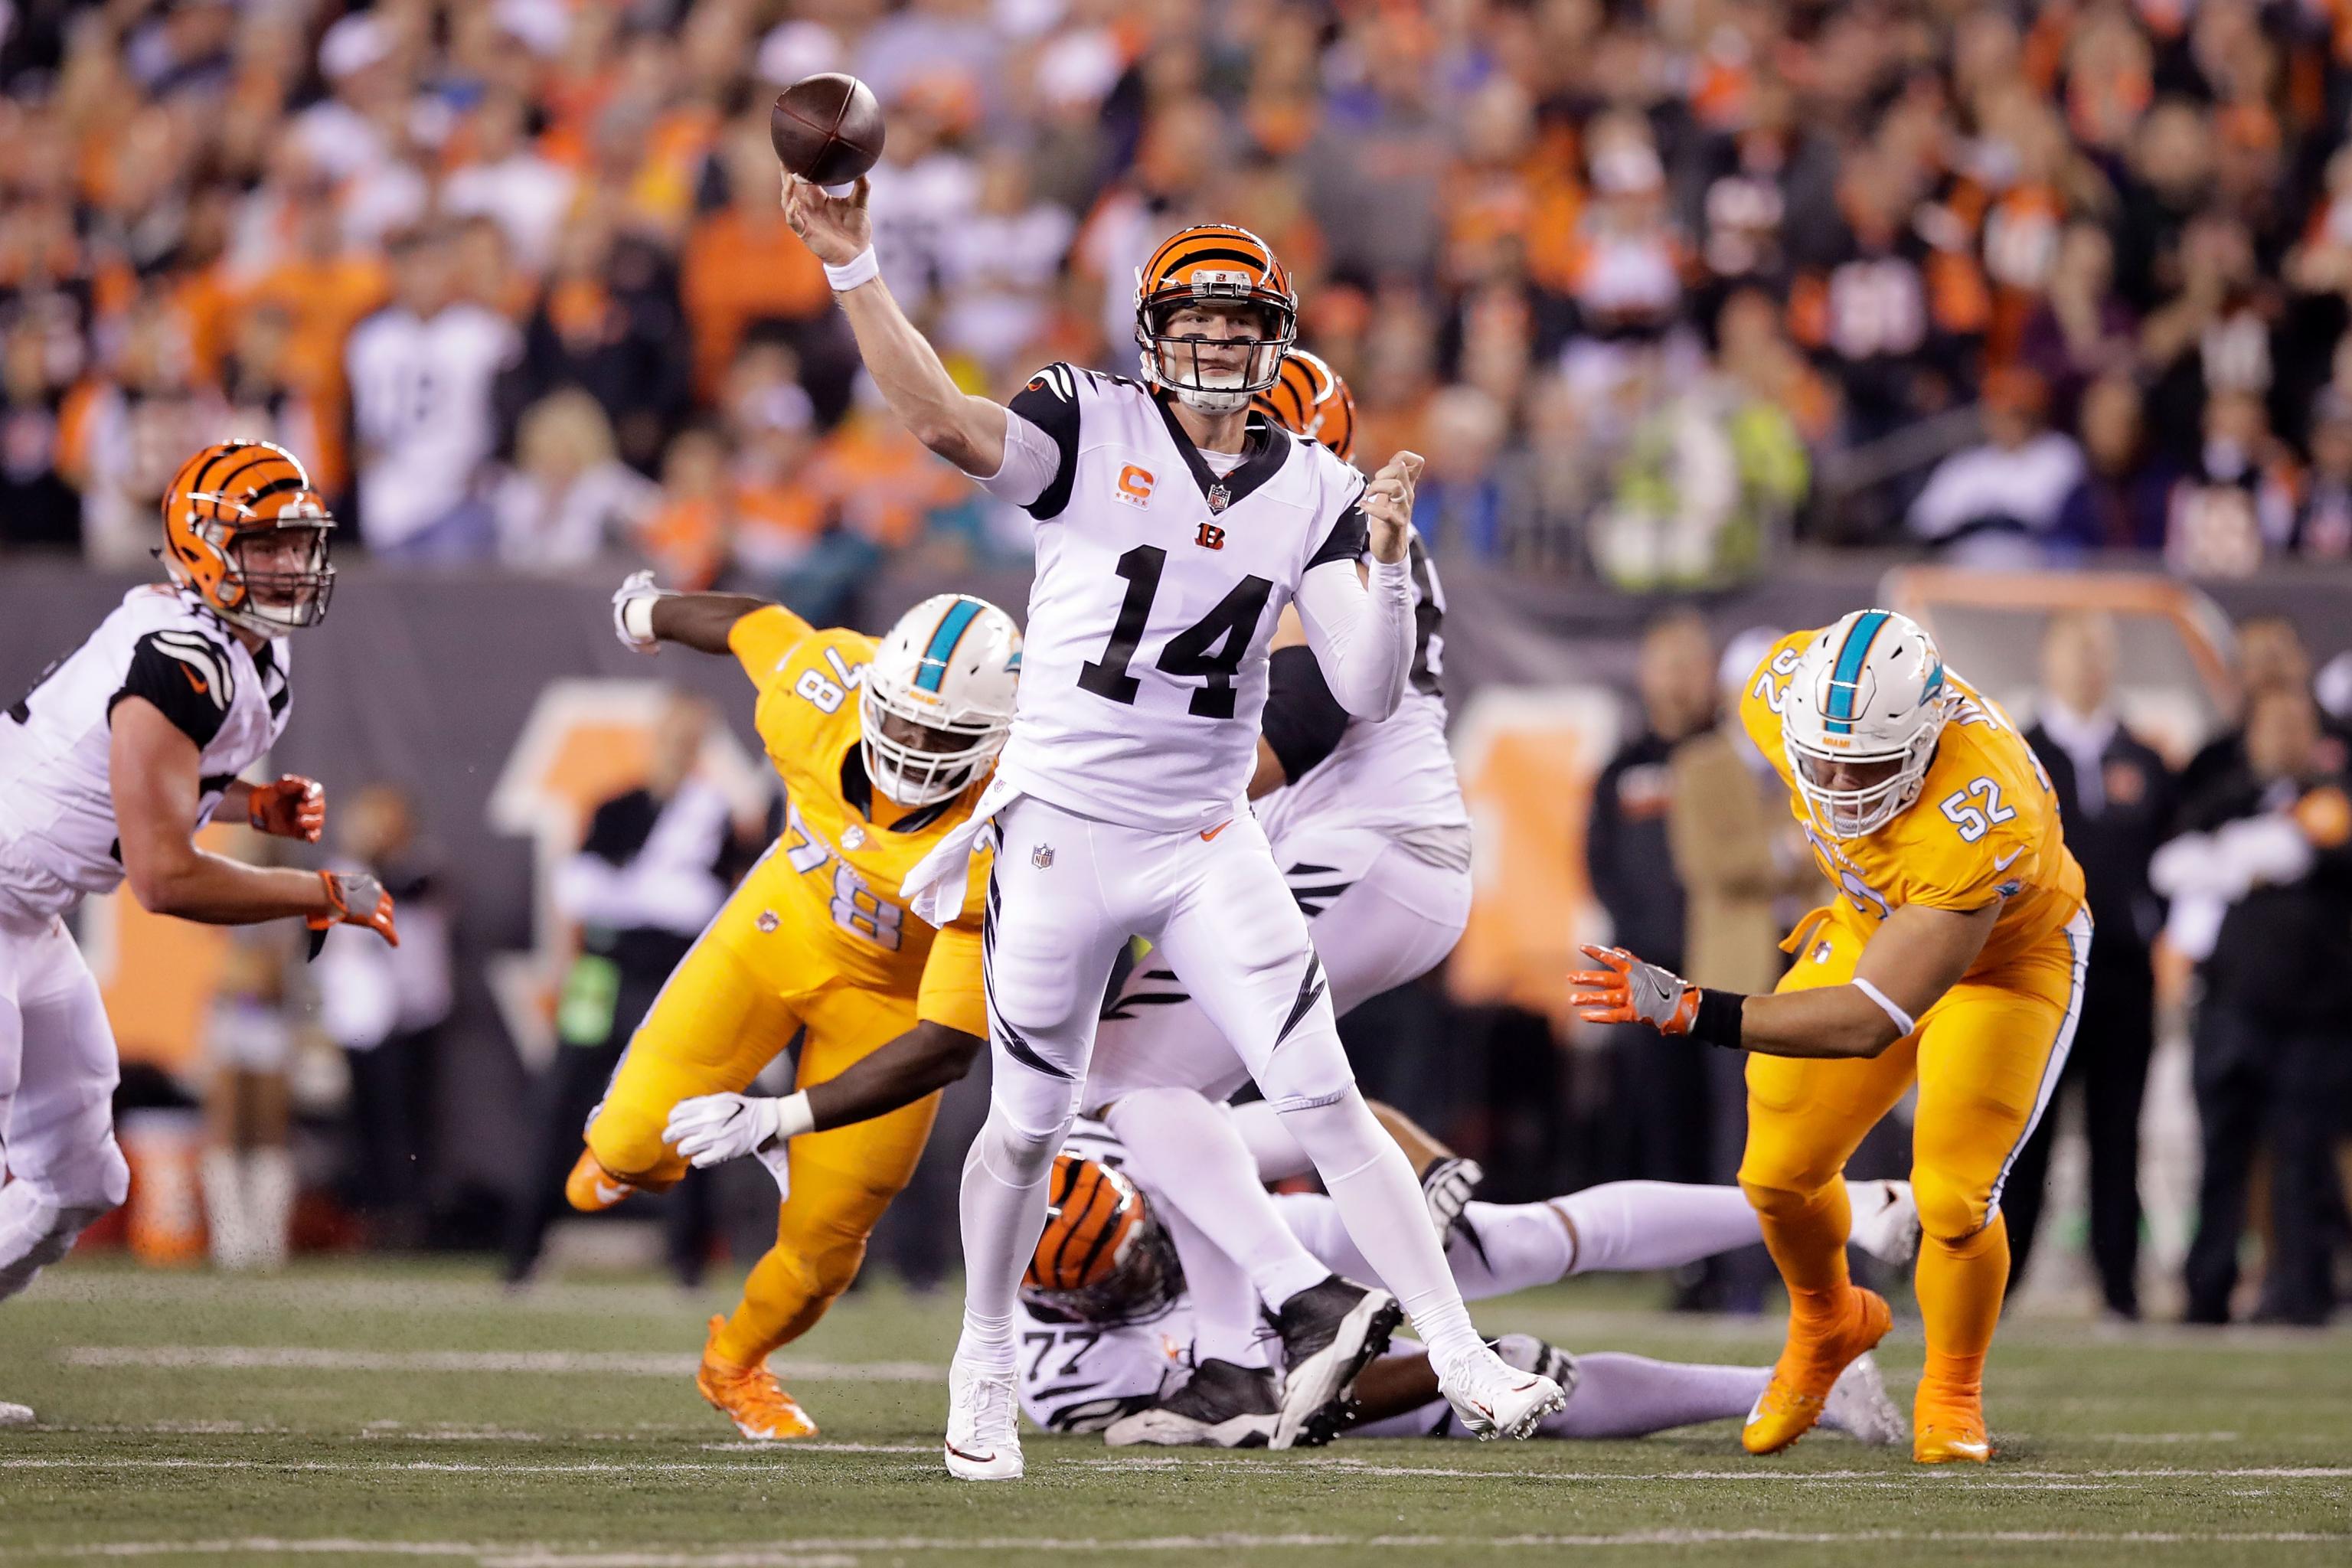 A.J. Green has big game as Bengals dominate Dolphins 22-7